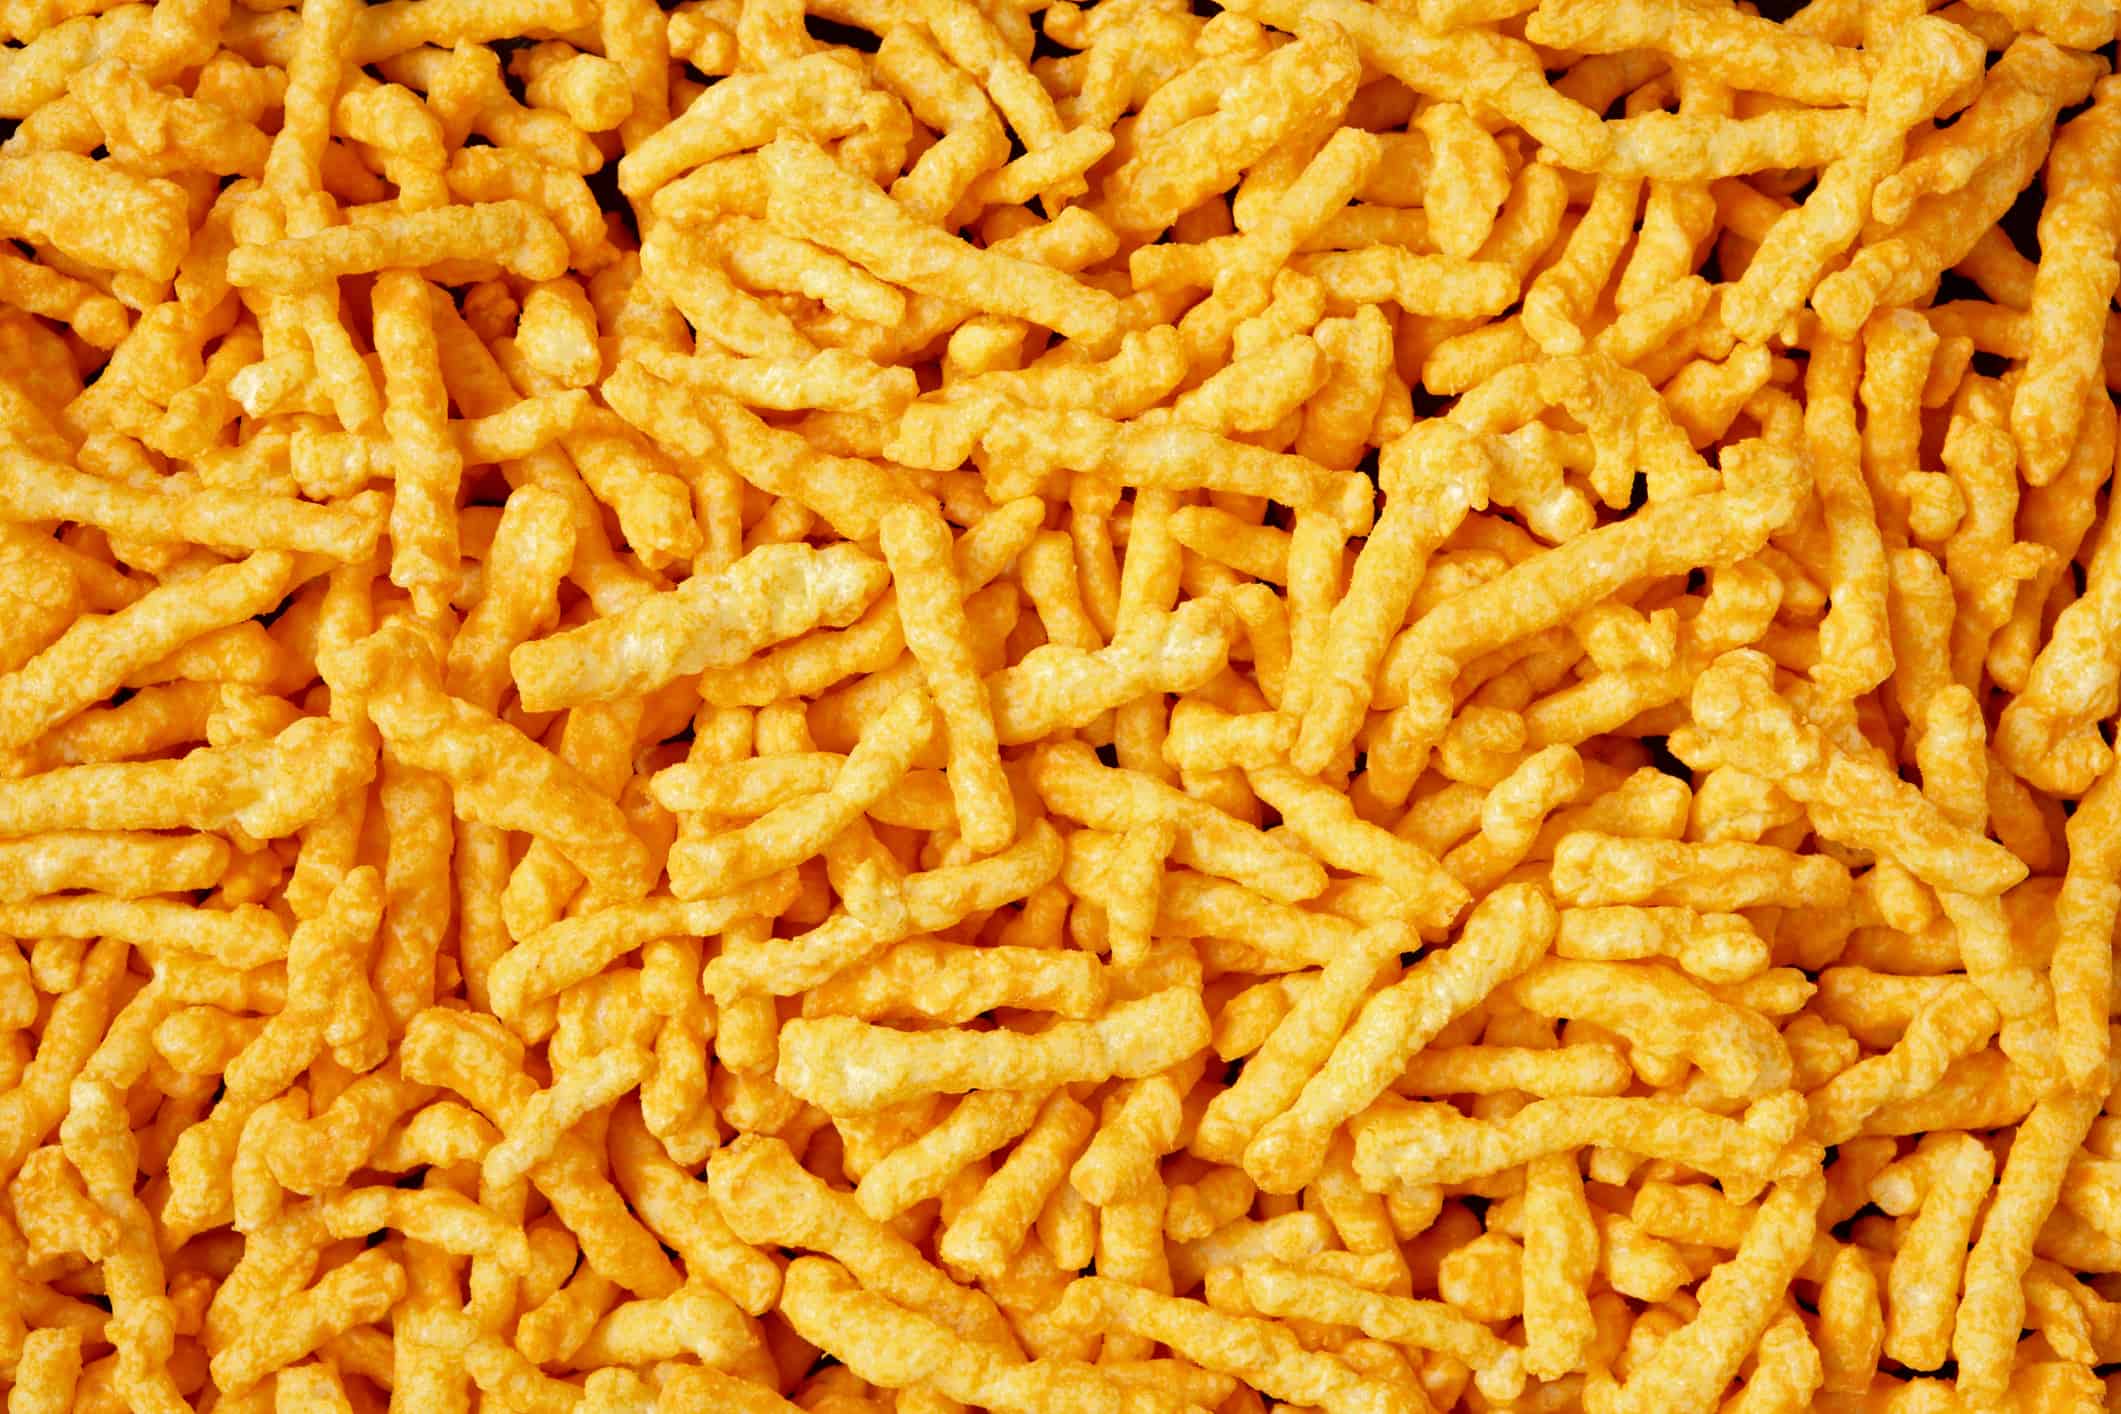 a seemingly infinite number of cheetos